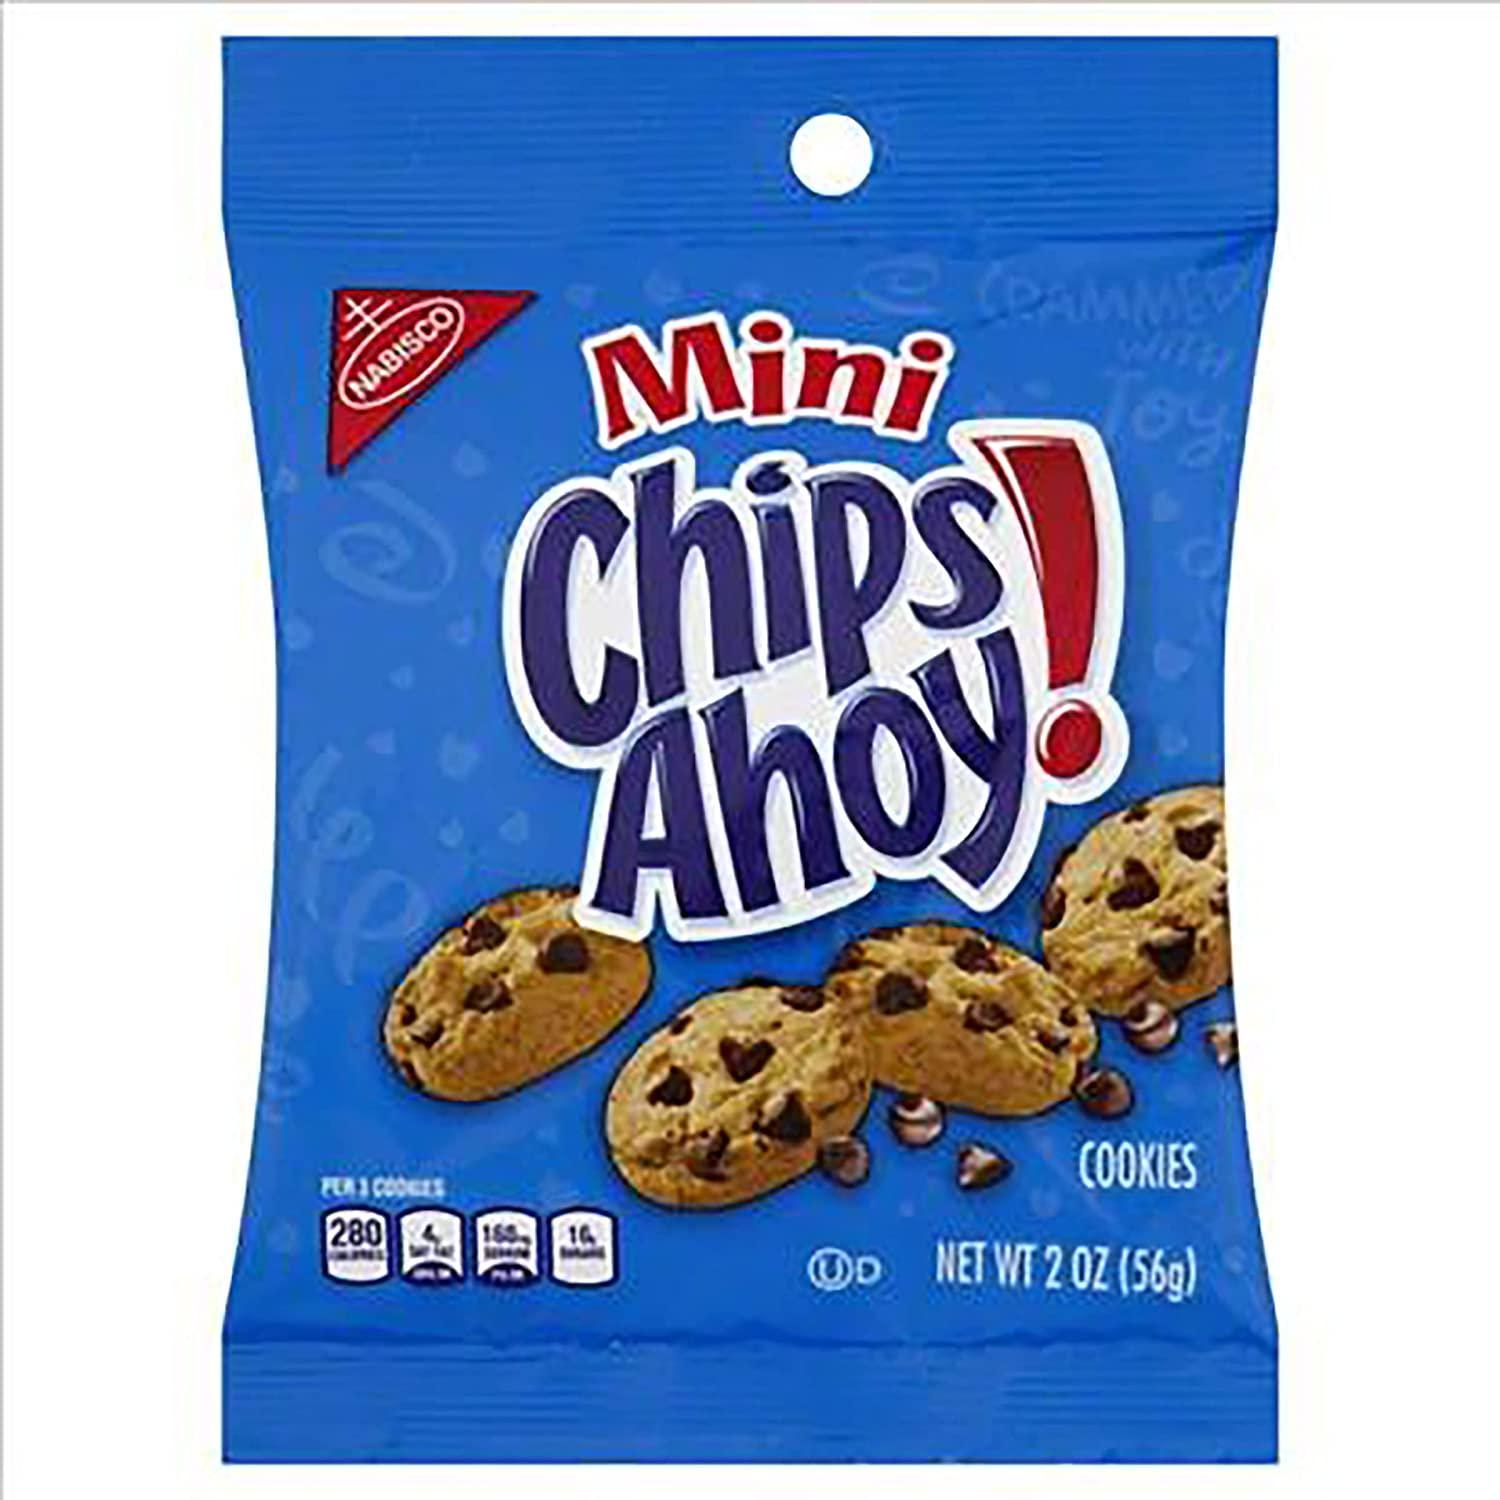 Chips Ahoy! Chunky Chocolate Chip Cookies, 2-Ounce Single Serve Packages  (Pack of 60)